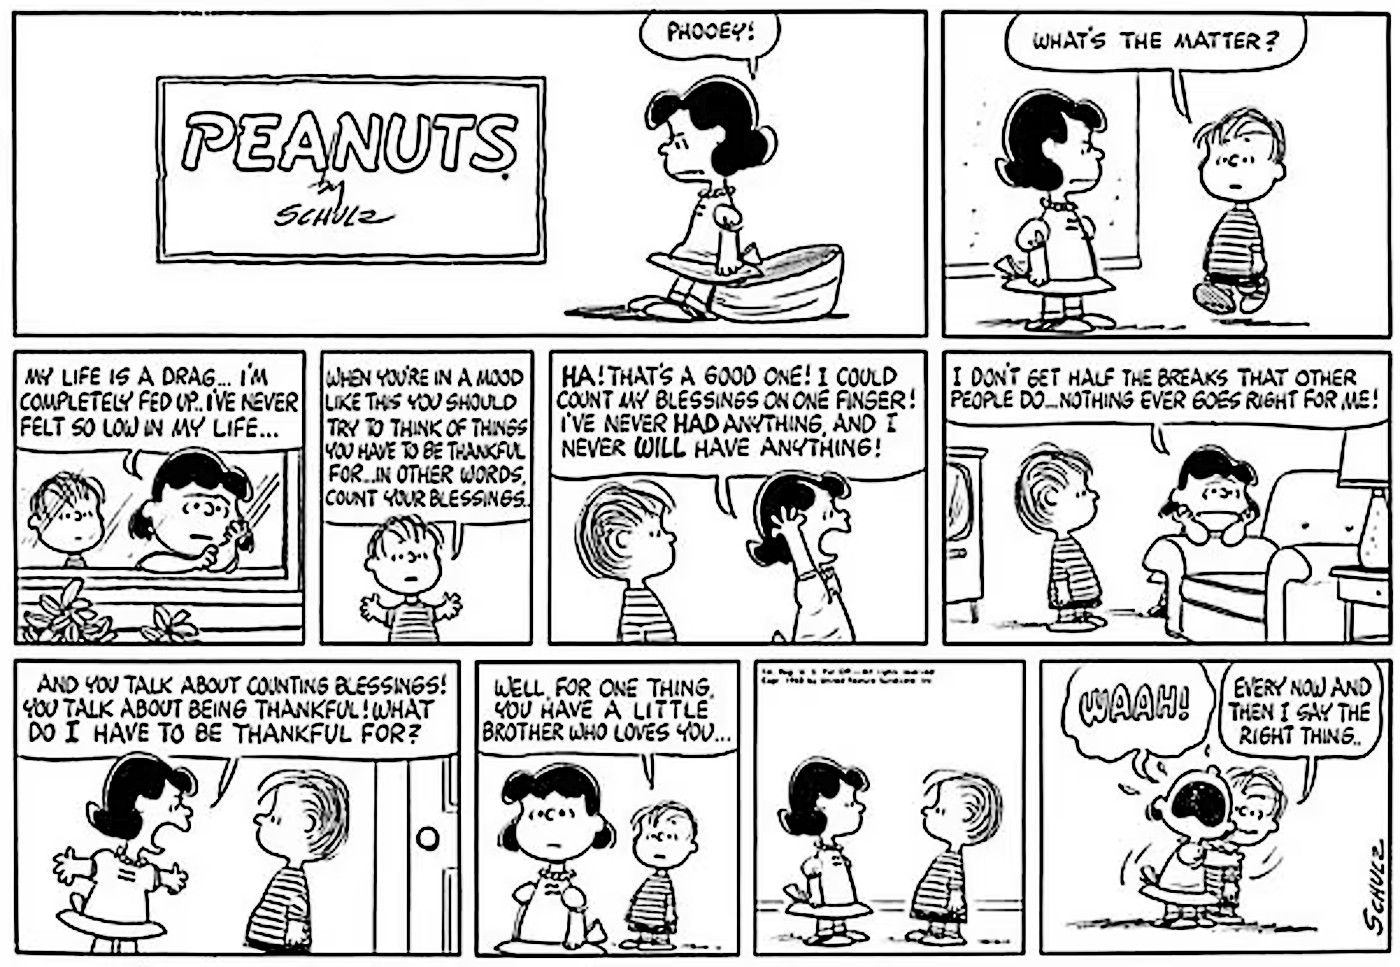 Peanuts, Lucy says her life is a drag